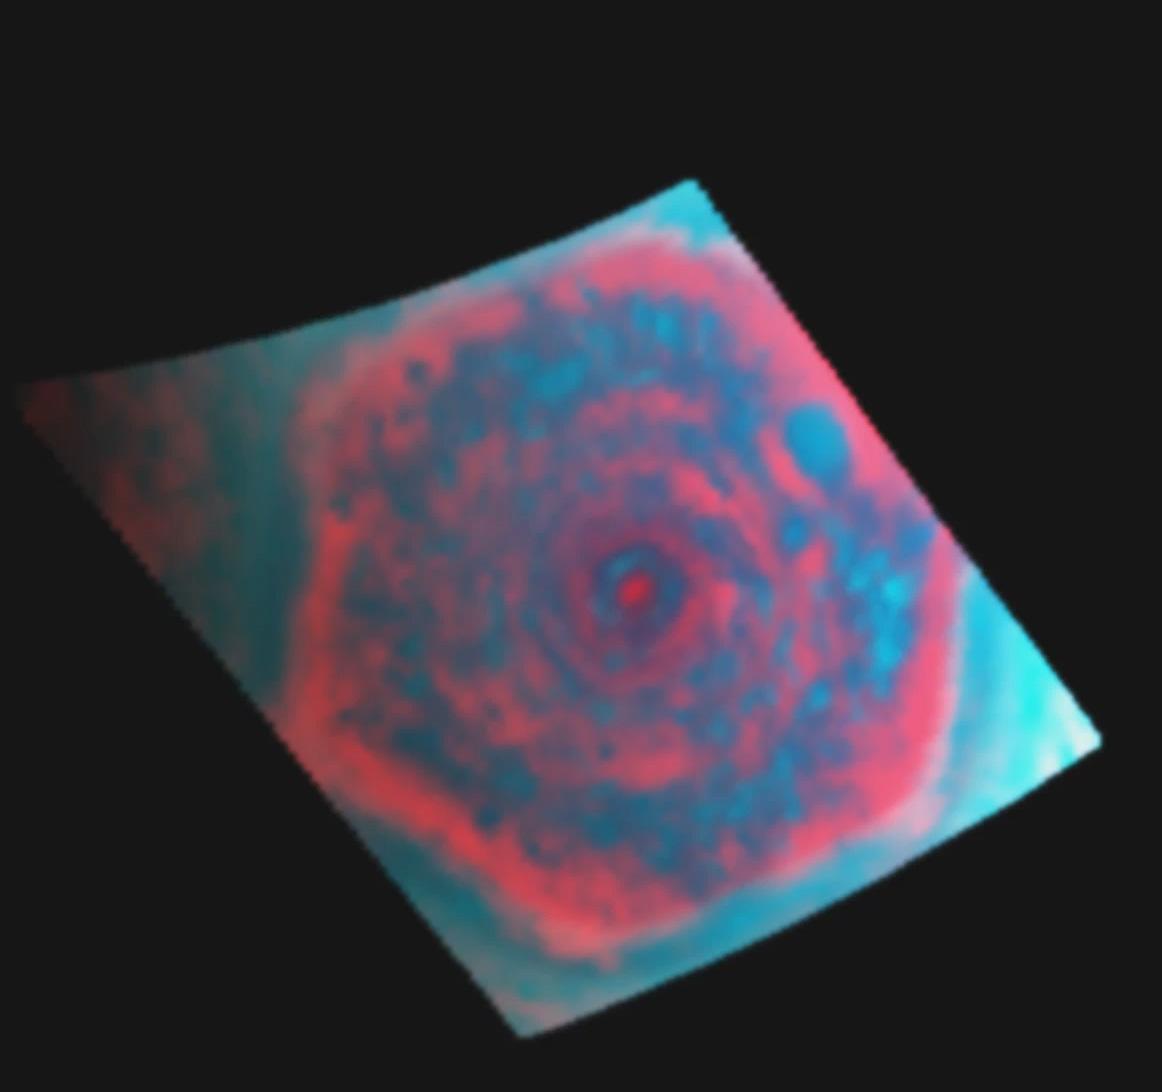 This colorized movie from NASA's Cassini mission shows a polar projection of the curious six-sided jet stream at Saturn's north pole known as 'the hexagon' in the infrared.